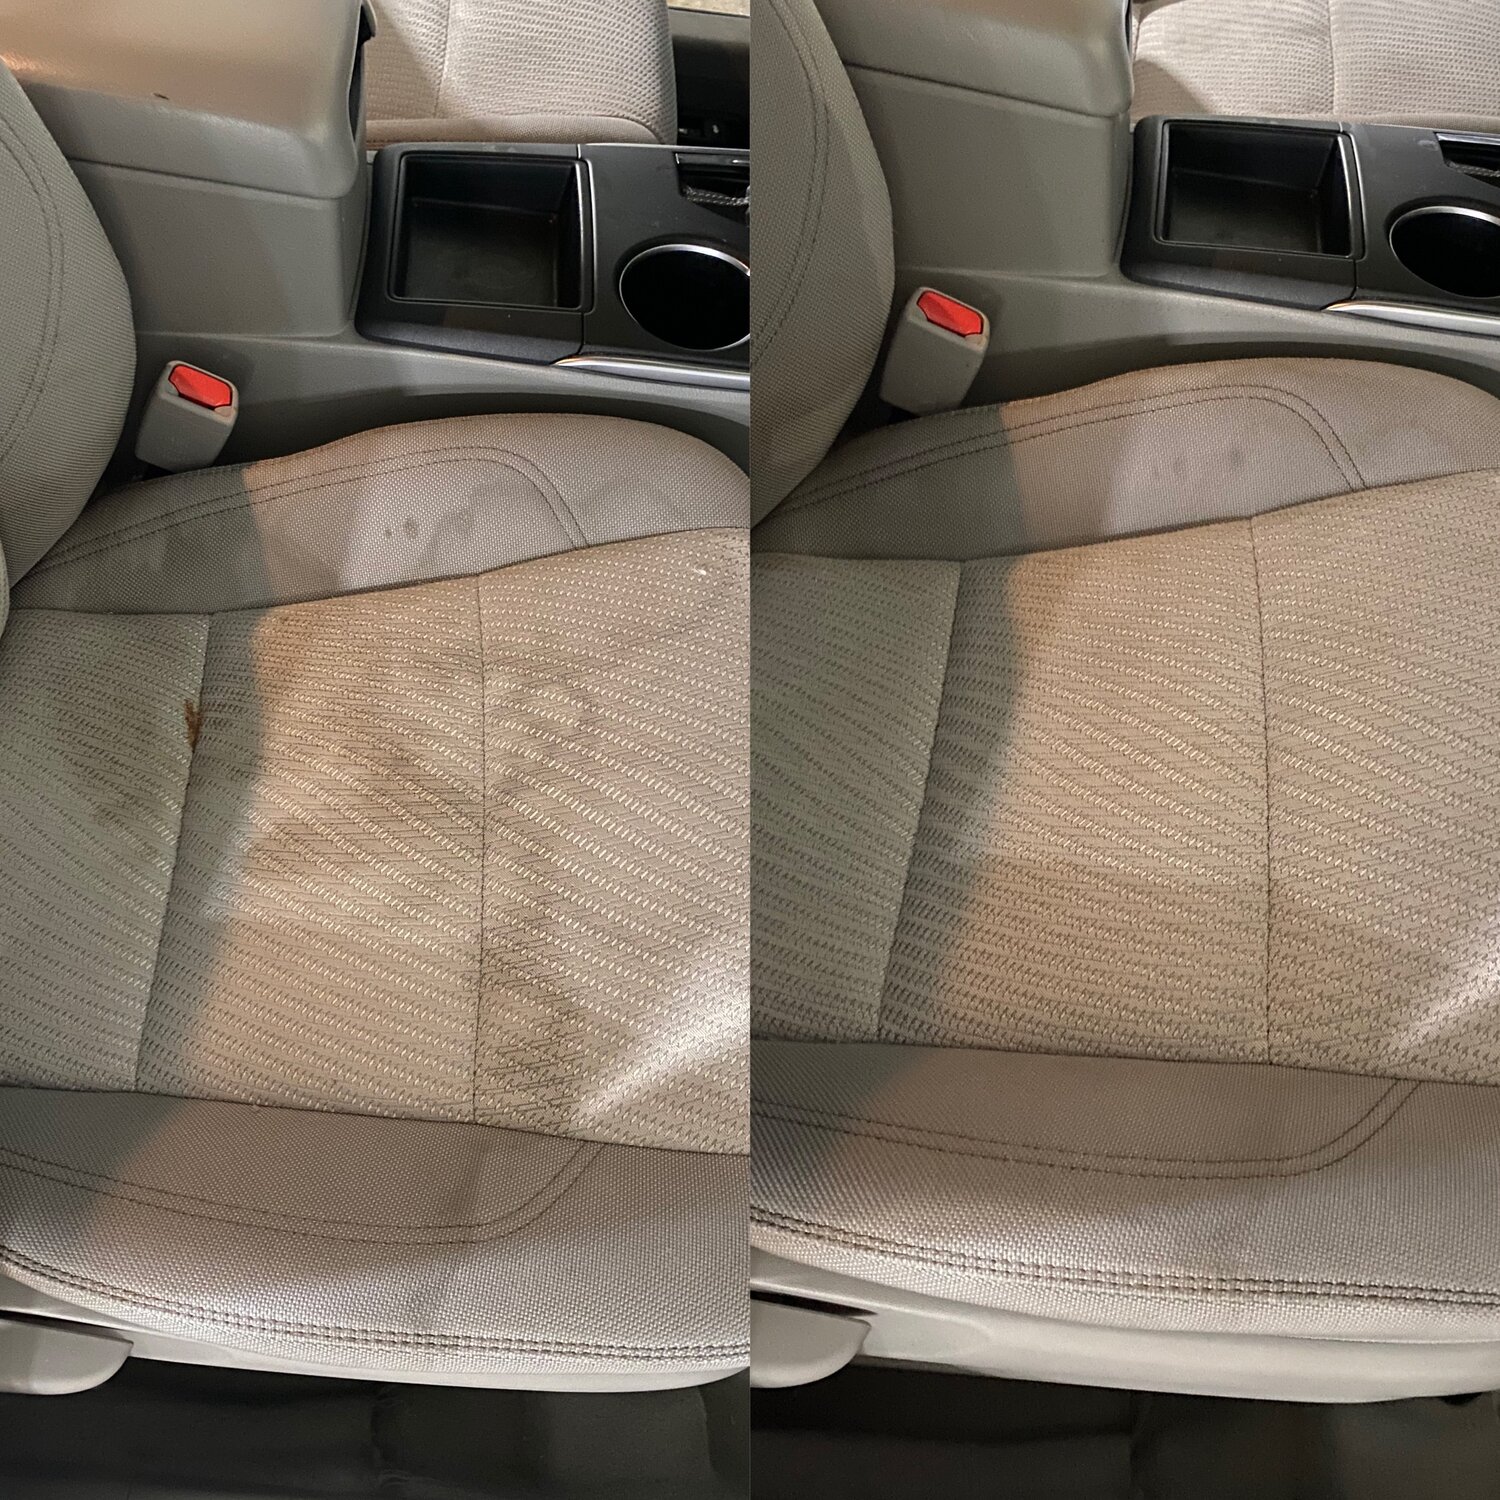 Disgusting Car Seats and Carpet Get Deep Cleaned 